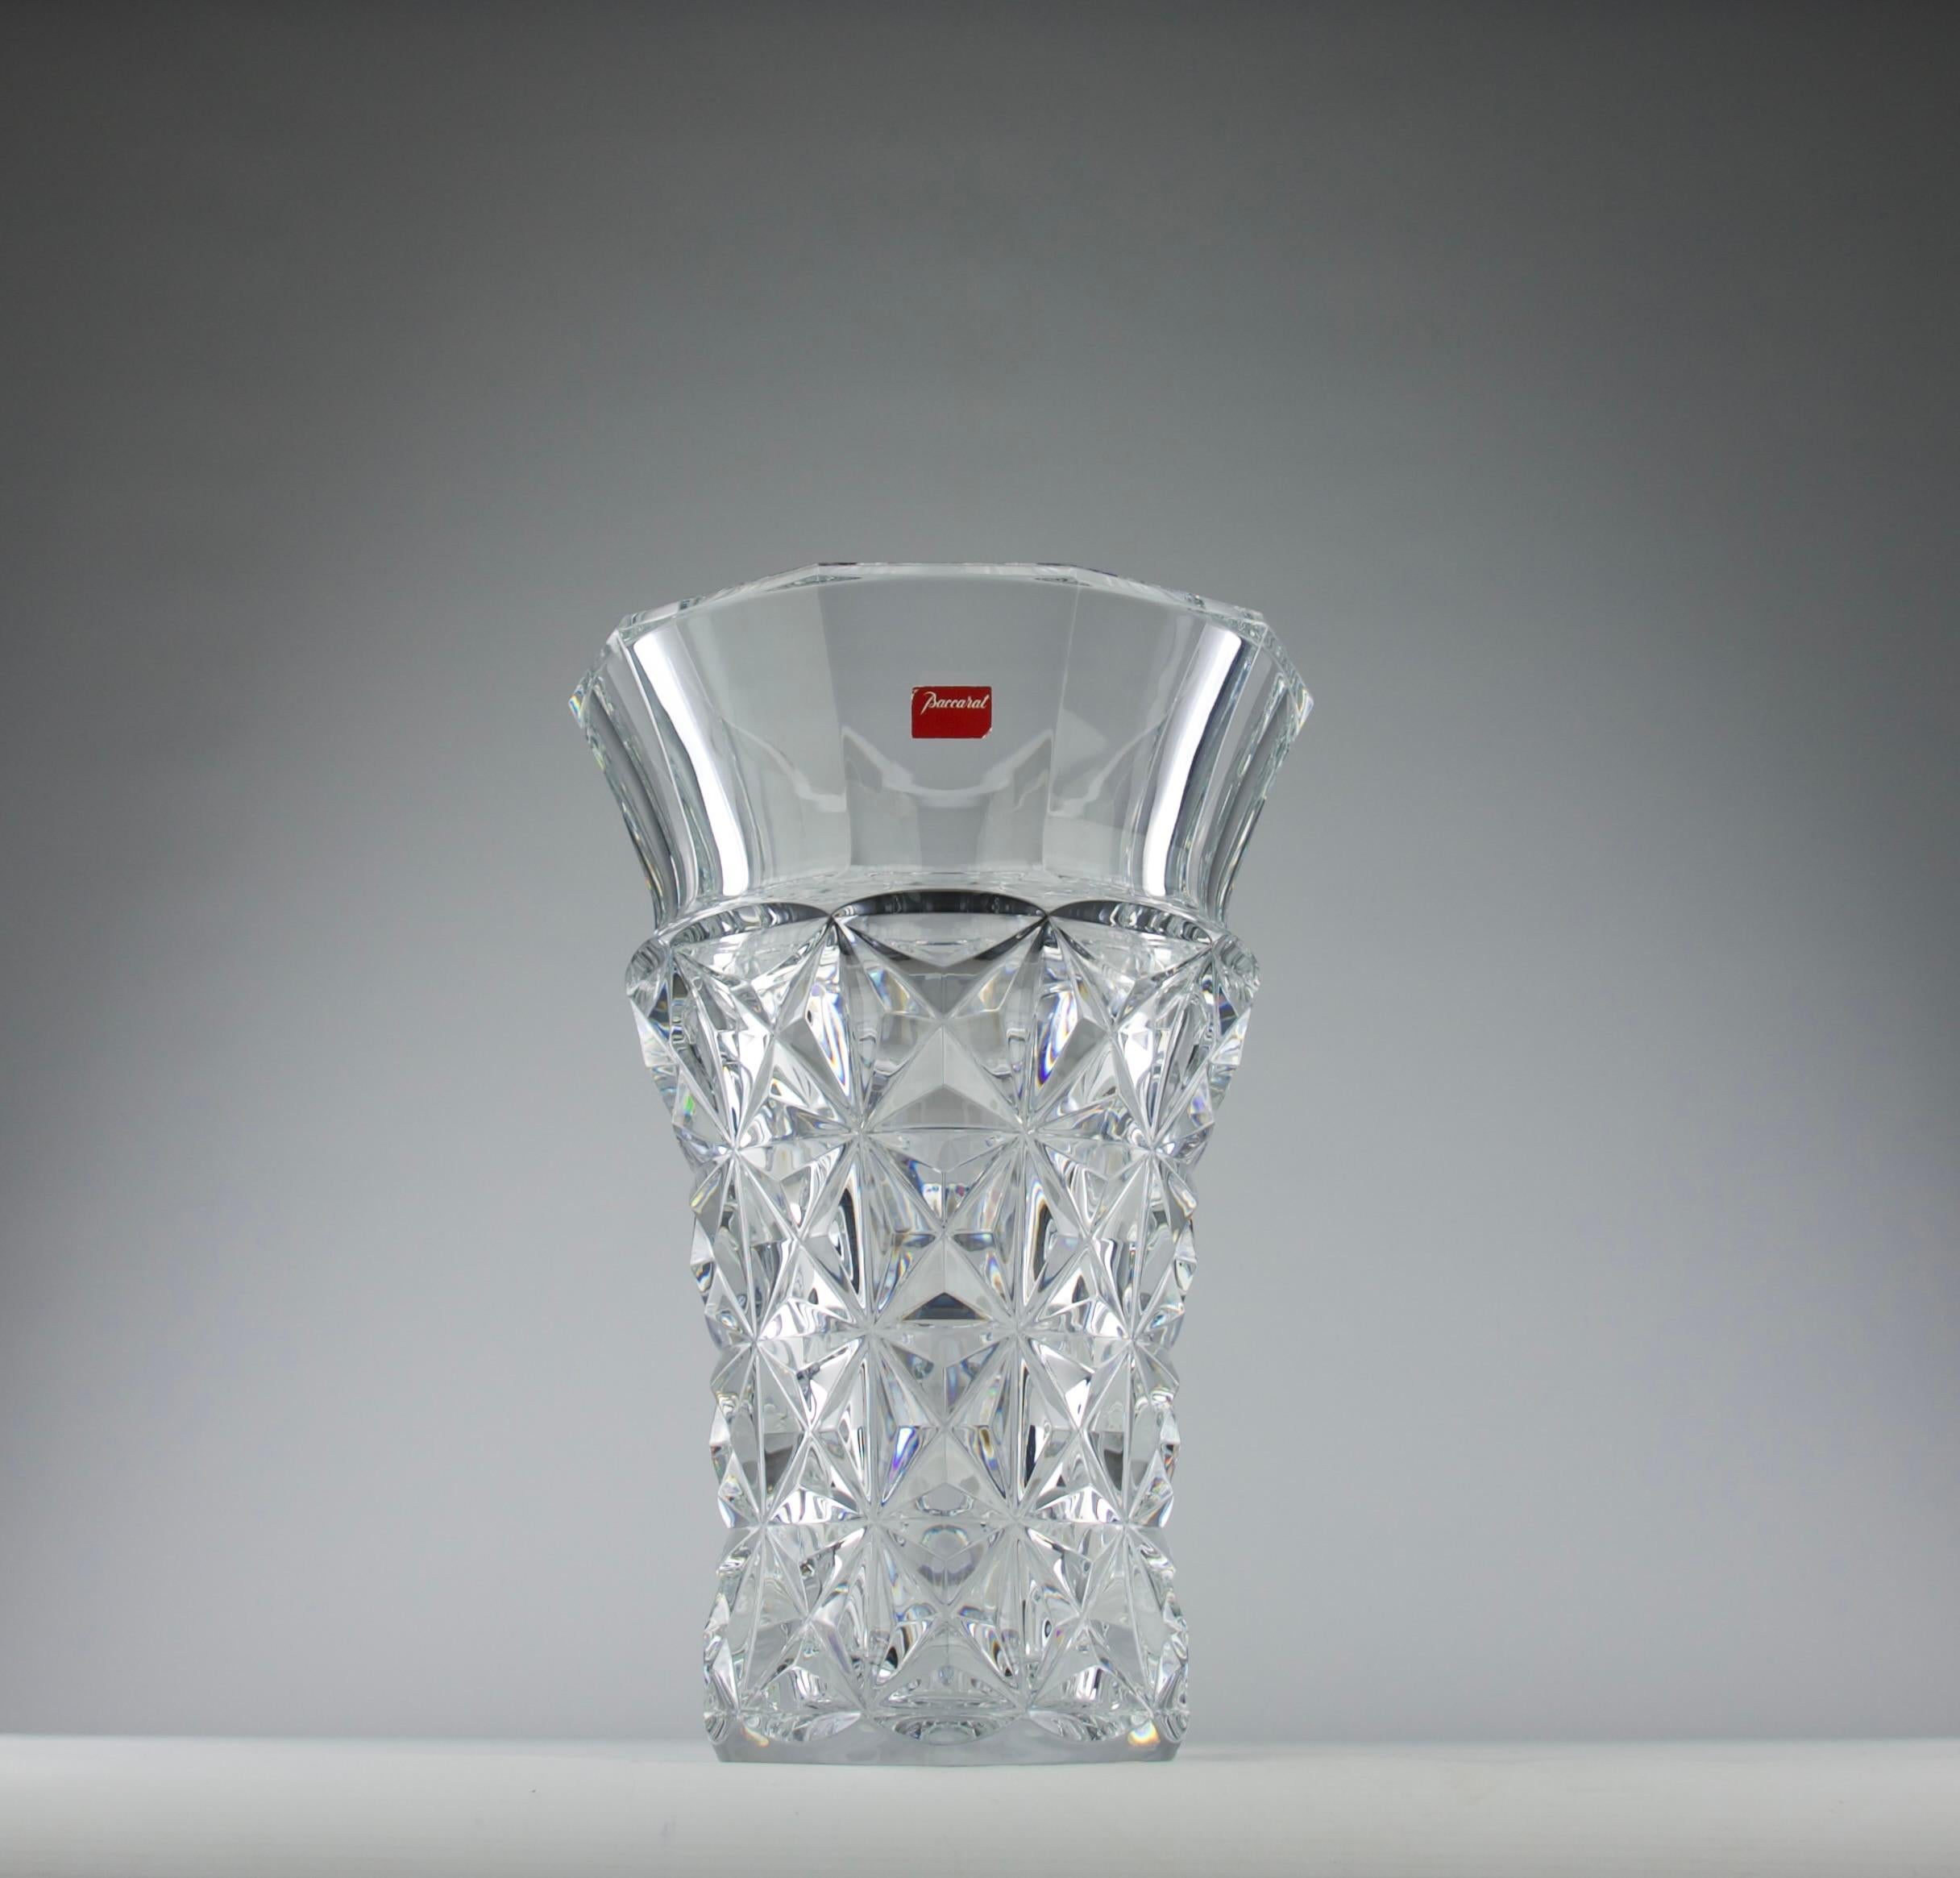 Superb Célimène Crystal Vase, crafted by the renowned Baccarat manufacture. This stunning piece showcases Baccarat's legendary craftsmanship, blending tradition with contemporary sophistication.

🔹 Design: The Célimène vase features a sleek